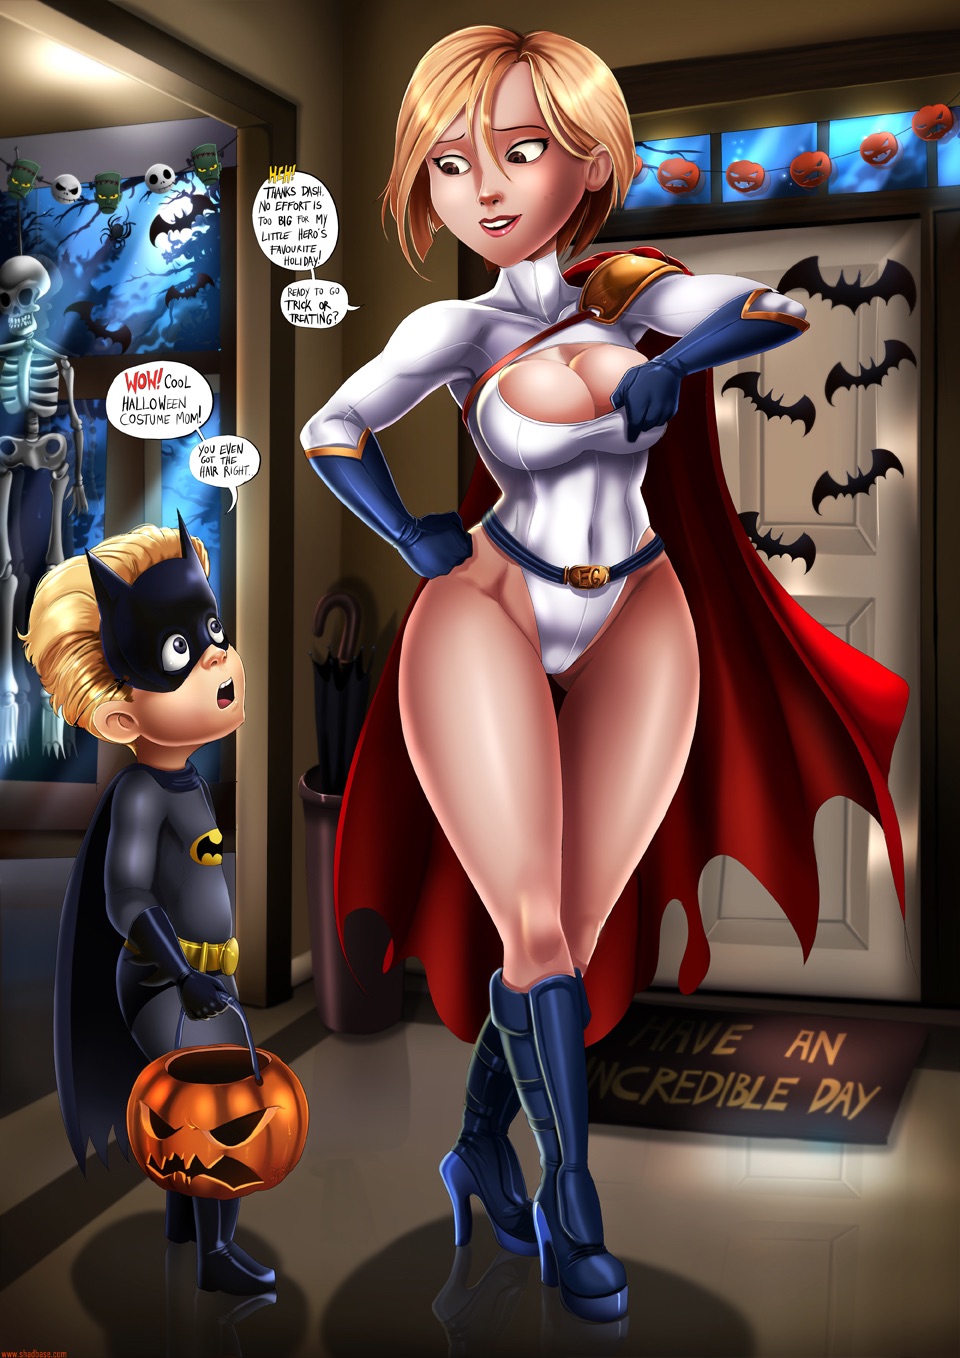 big_ass blond_hair boots brown_eyes cape cleavage cosplay dash_parr dc disney gloves hair halloween heels helen_parr leotard mask mature milf mother mother_and_son power_girl shadman short_hair text the_incredibles